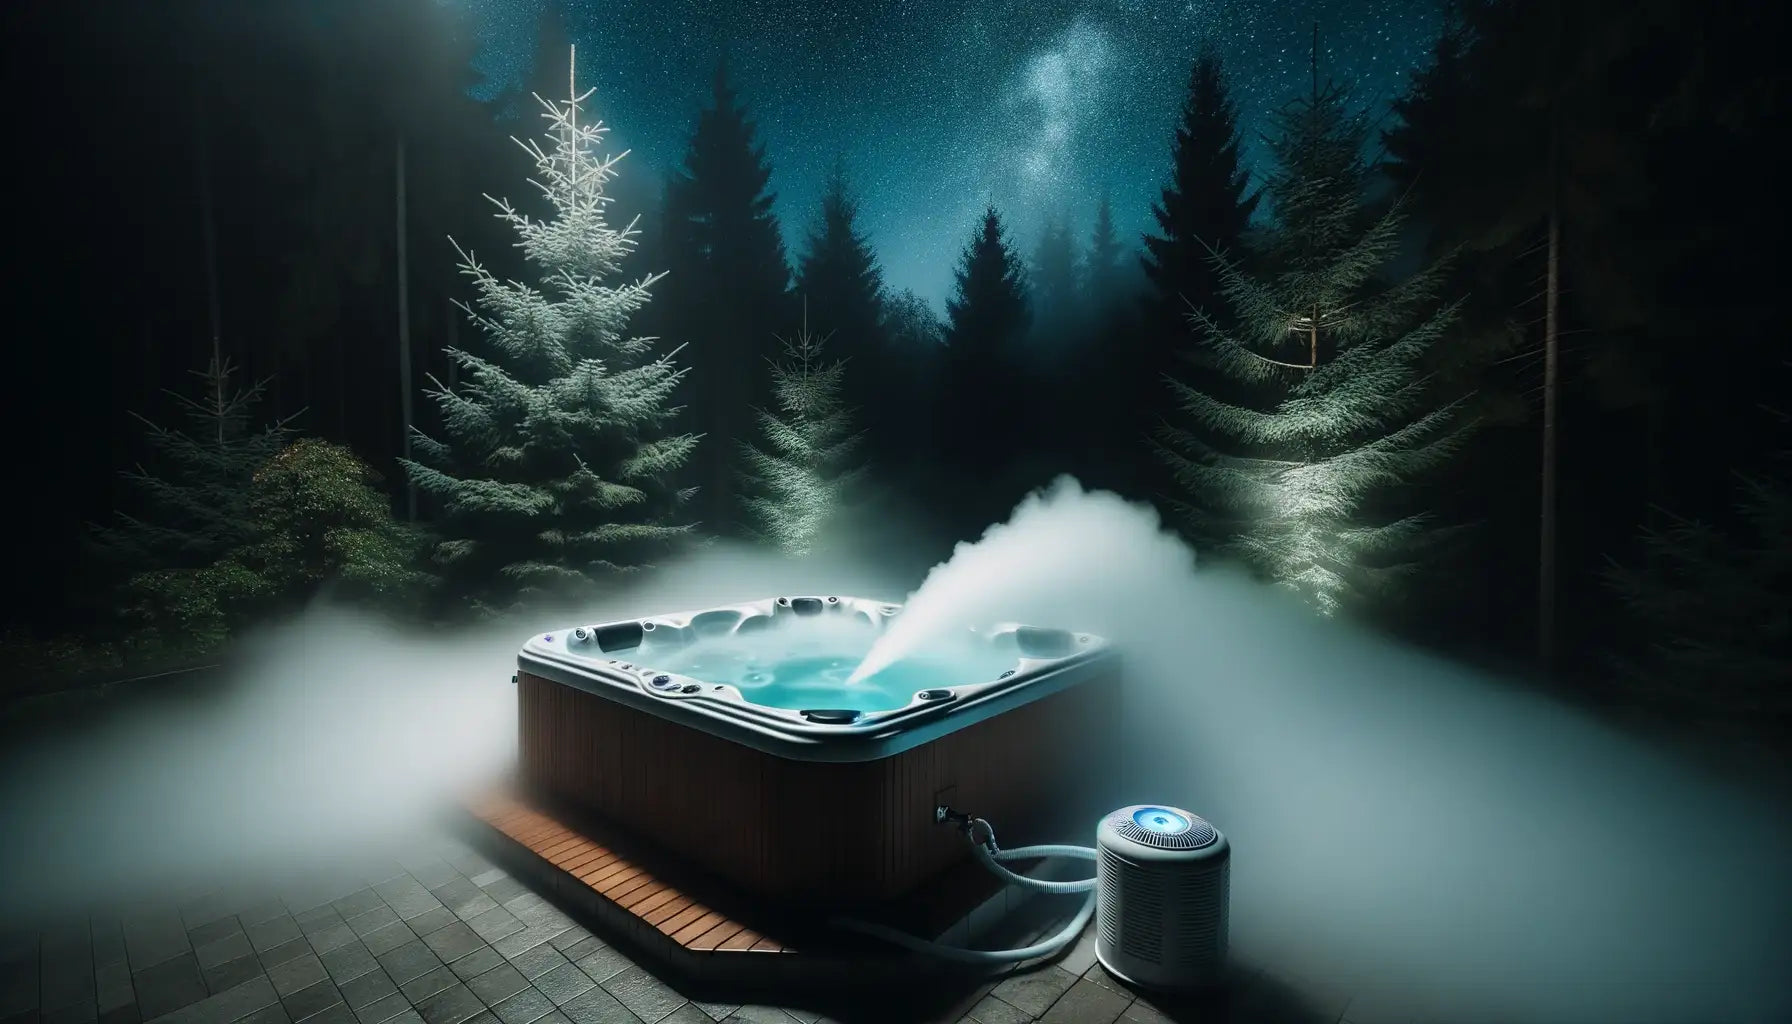 Photo of an outdoor hot tub at night, surrounded by trees and under a starry sky. The hot tub emits a thick layer of fog, creating a mysterious and spooky ambiance. A fog machine sits discreetly by the side, with its nozzle directed towards the water.